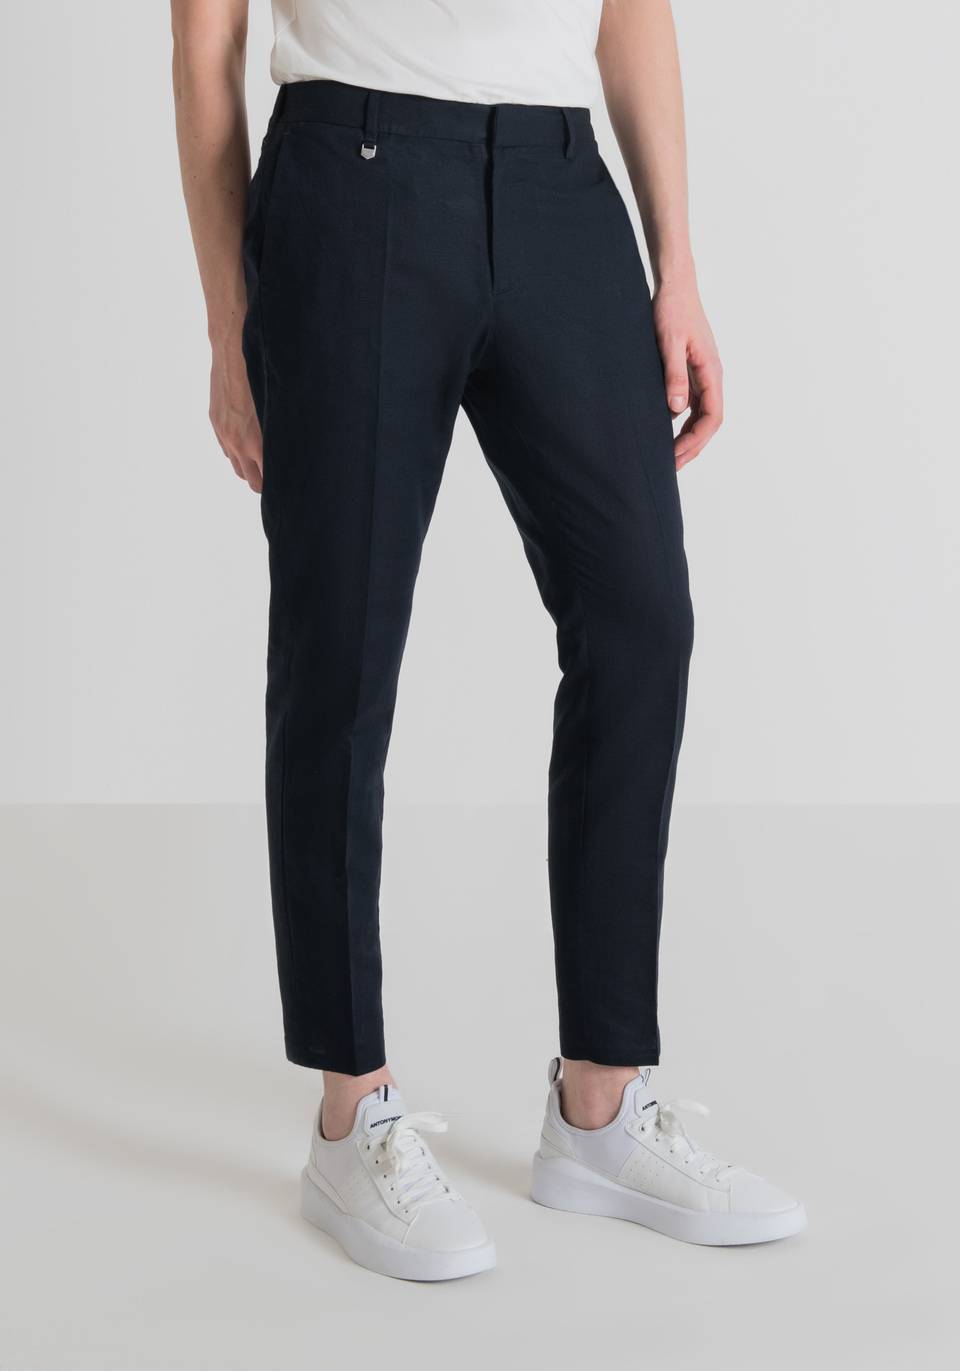 SLIM-FIT “ARTHUR” TROUSERS IN A SOFT COTTON BLEND WITH AN ELASTICATED DRAWSTRING WAIST - Antony Morato Online Shop